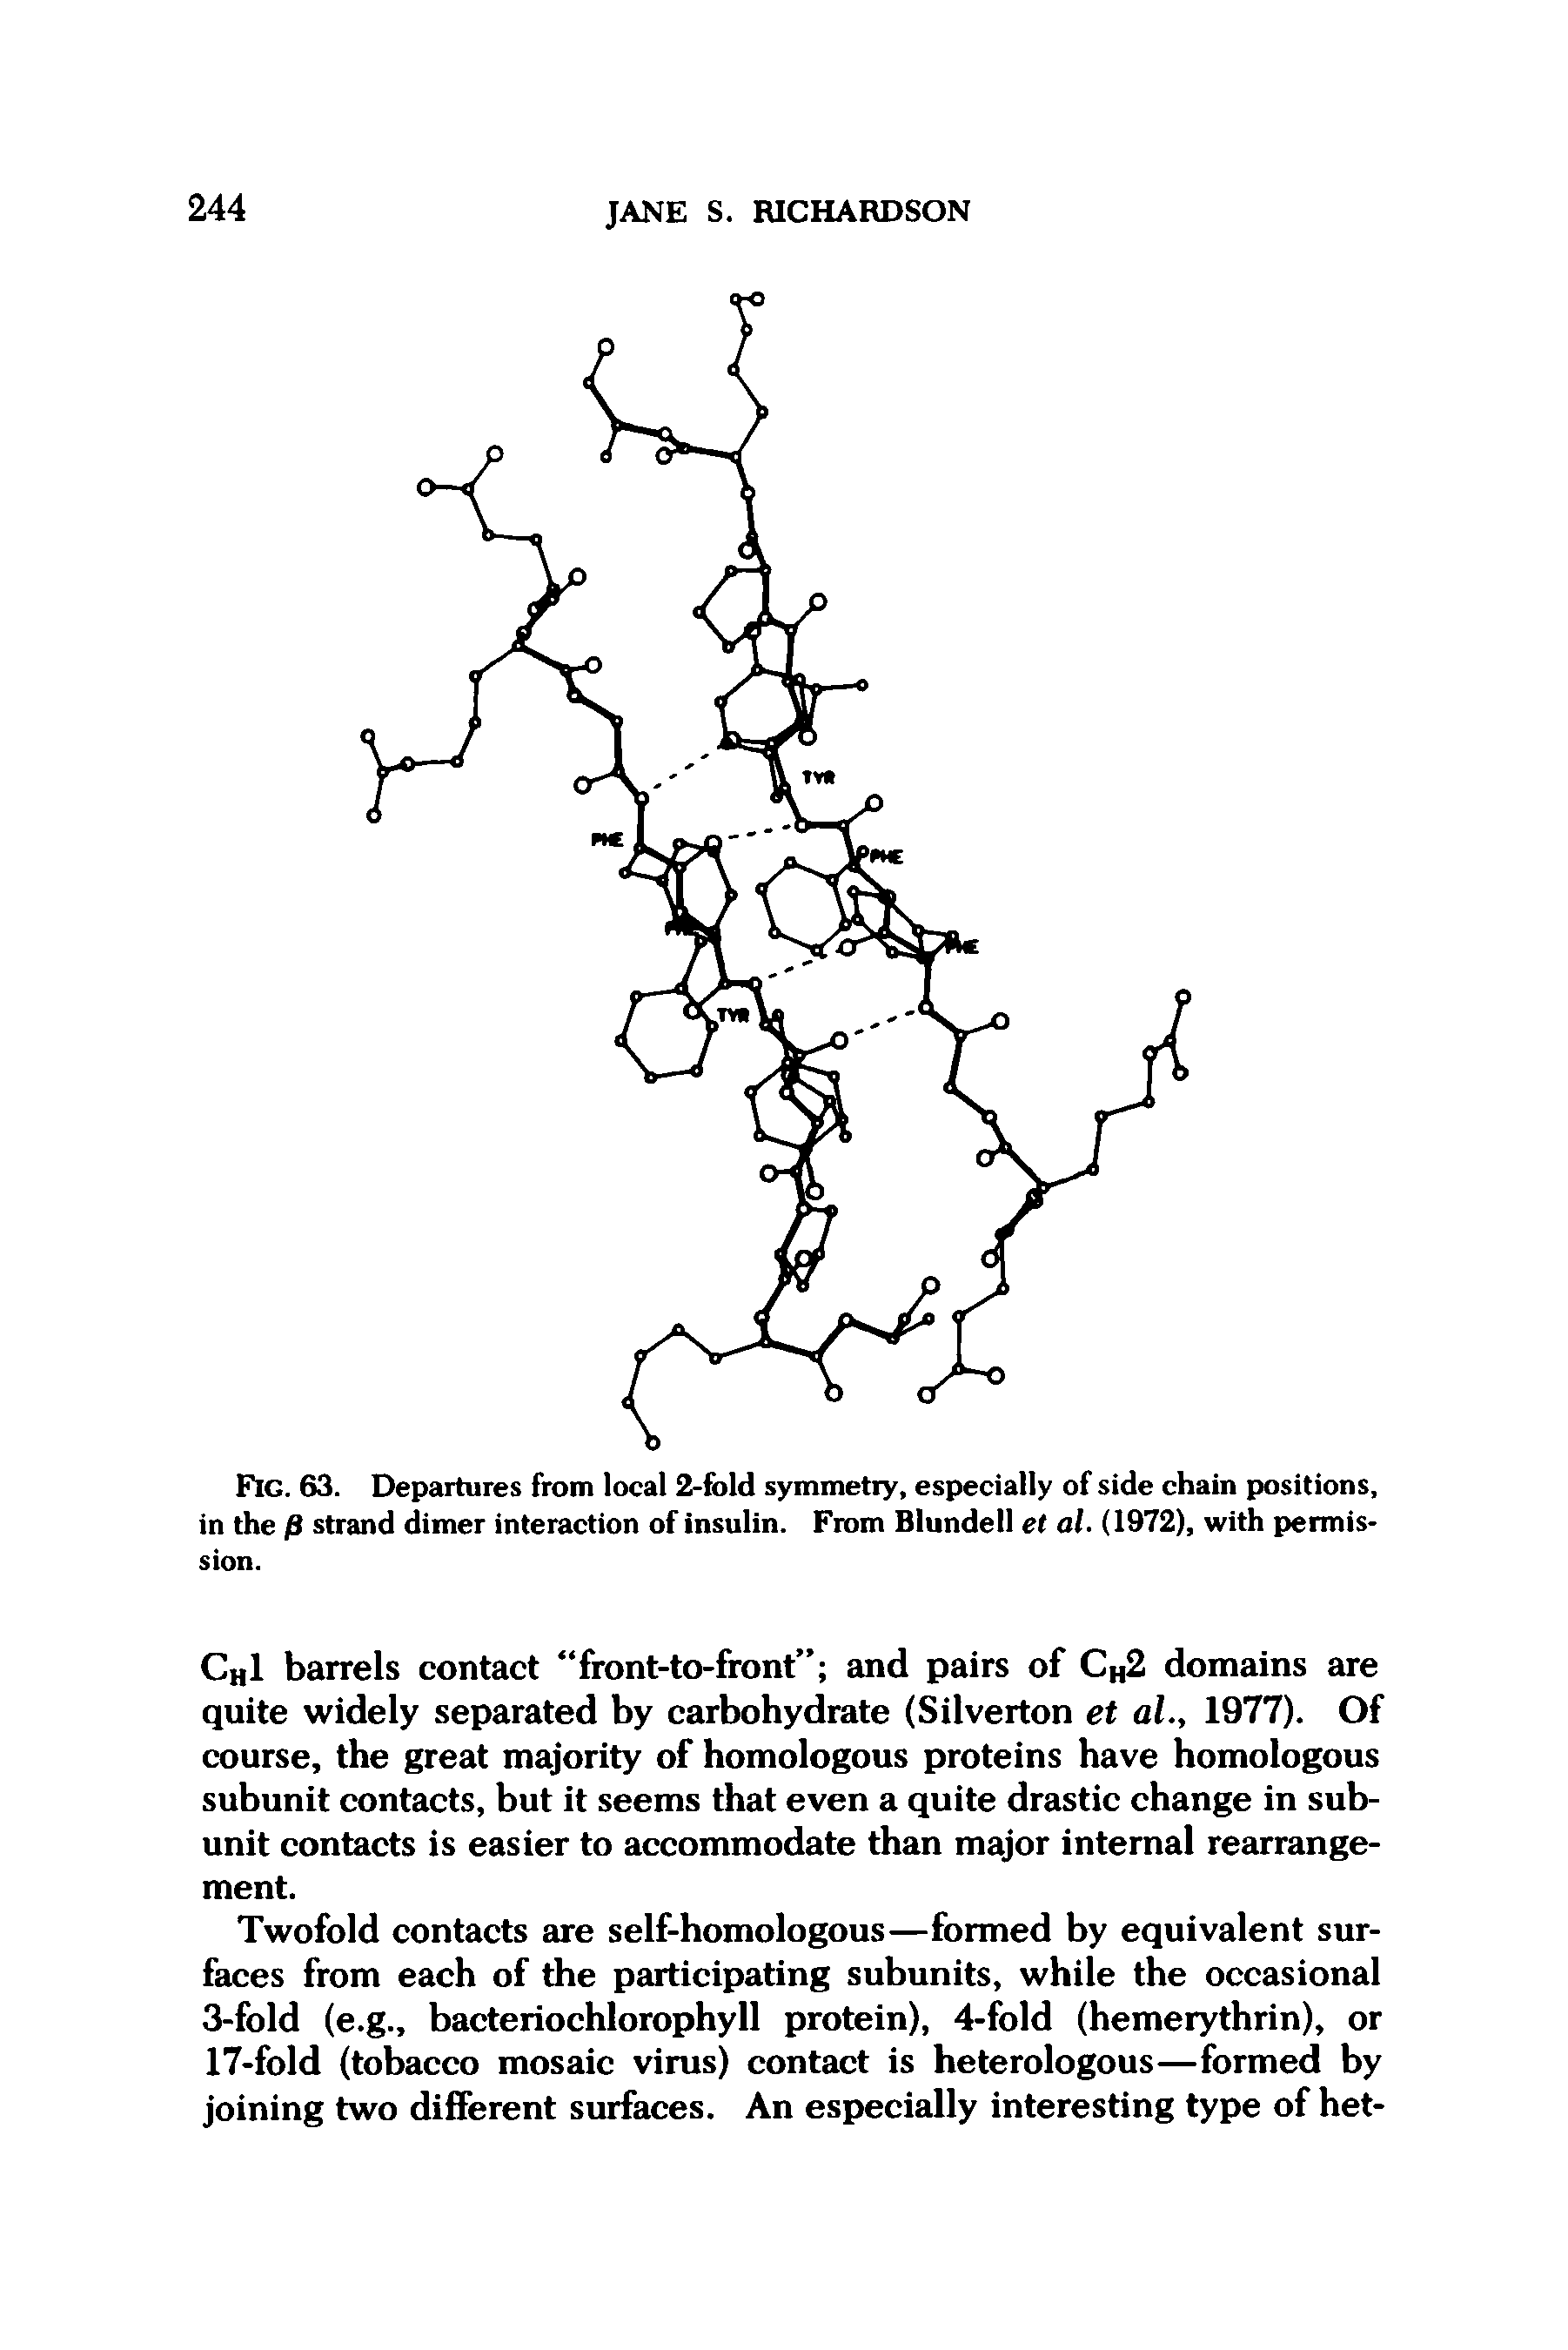 Fig. 63. Departures from local 2-fold symmetry, especially of side chain positions, in the j8 strand dimer interaction of insulin. From Blundell et al. (1972), with permission.